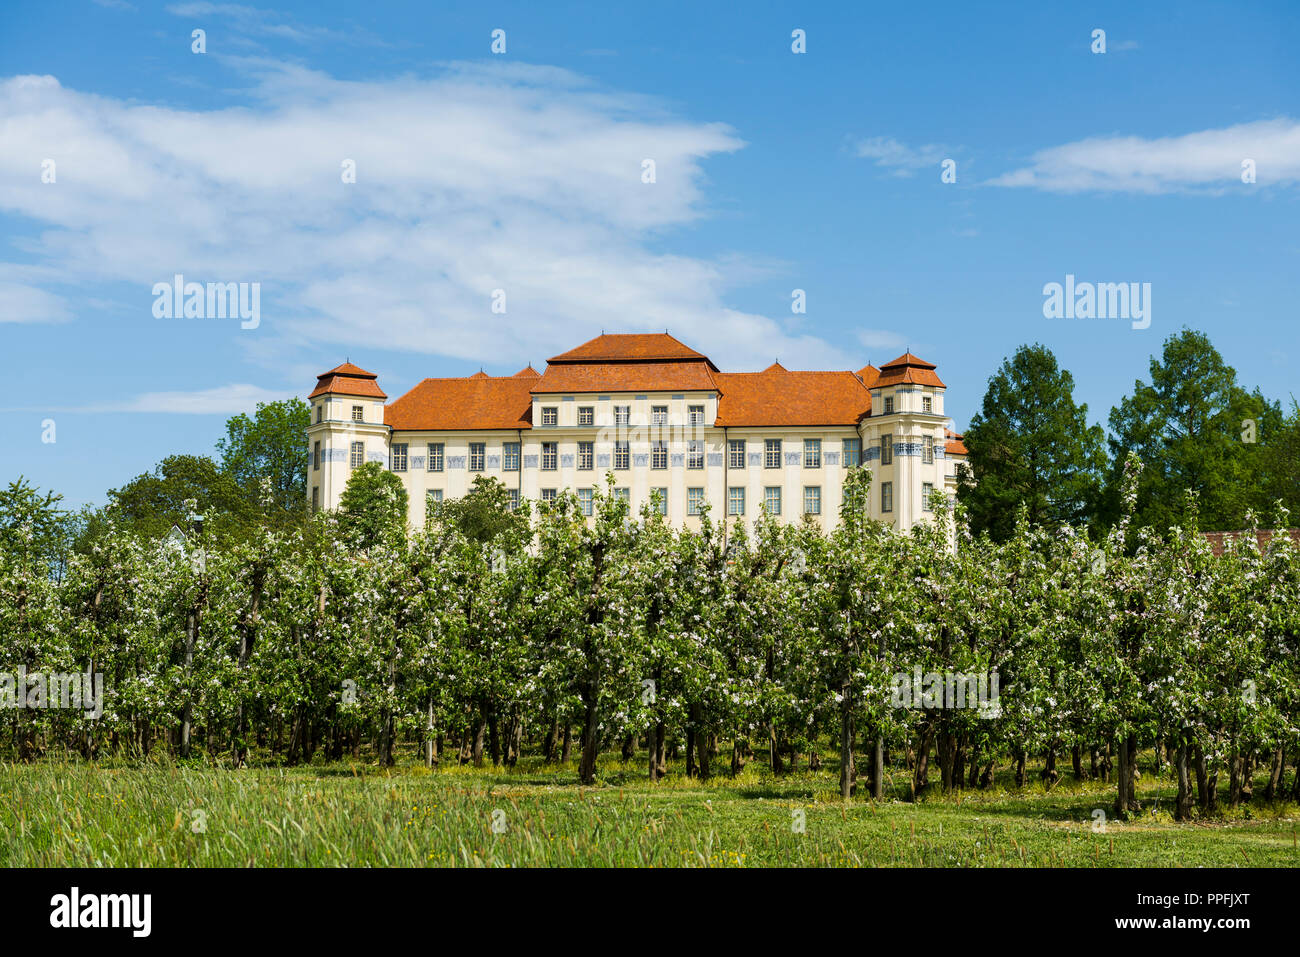 New castle and flowering fruit trees, Tettnang, Upper Swabia, Lake Constance region, Baden-Württemberg, Germany Stock Photo